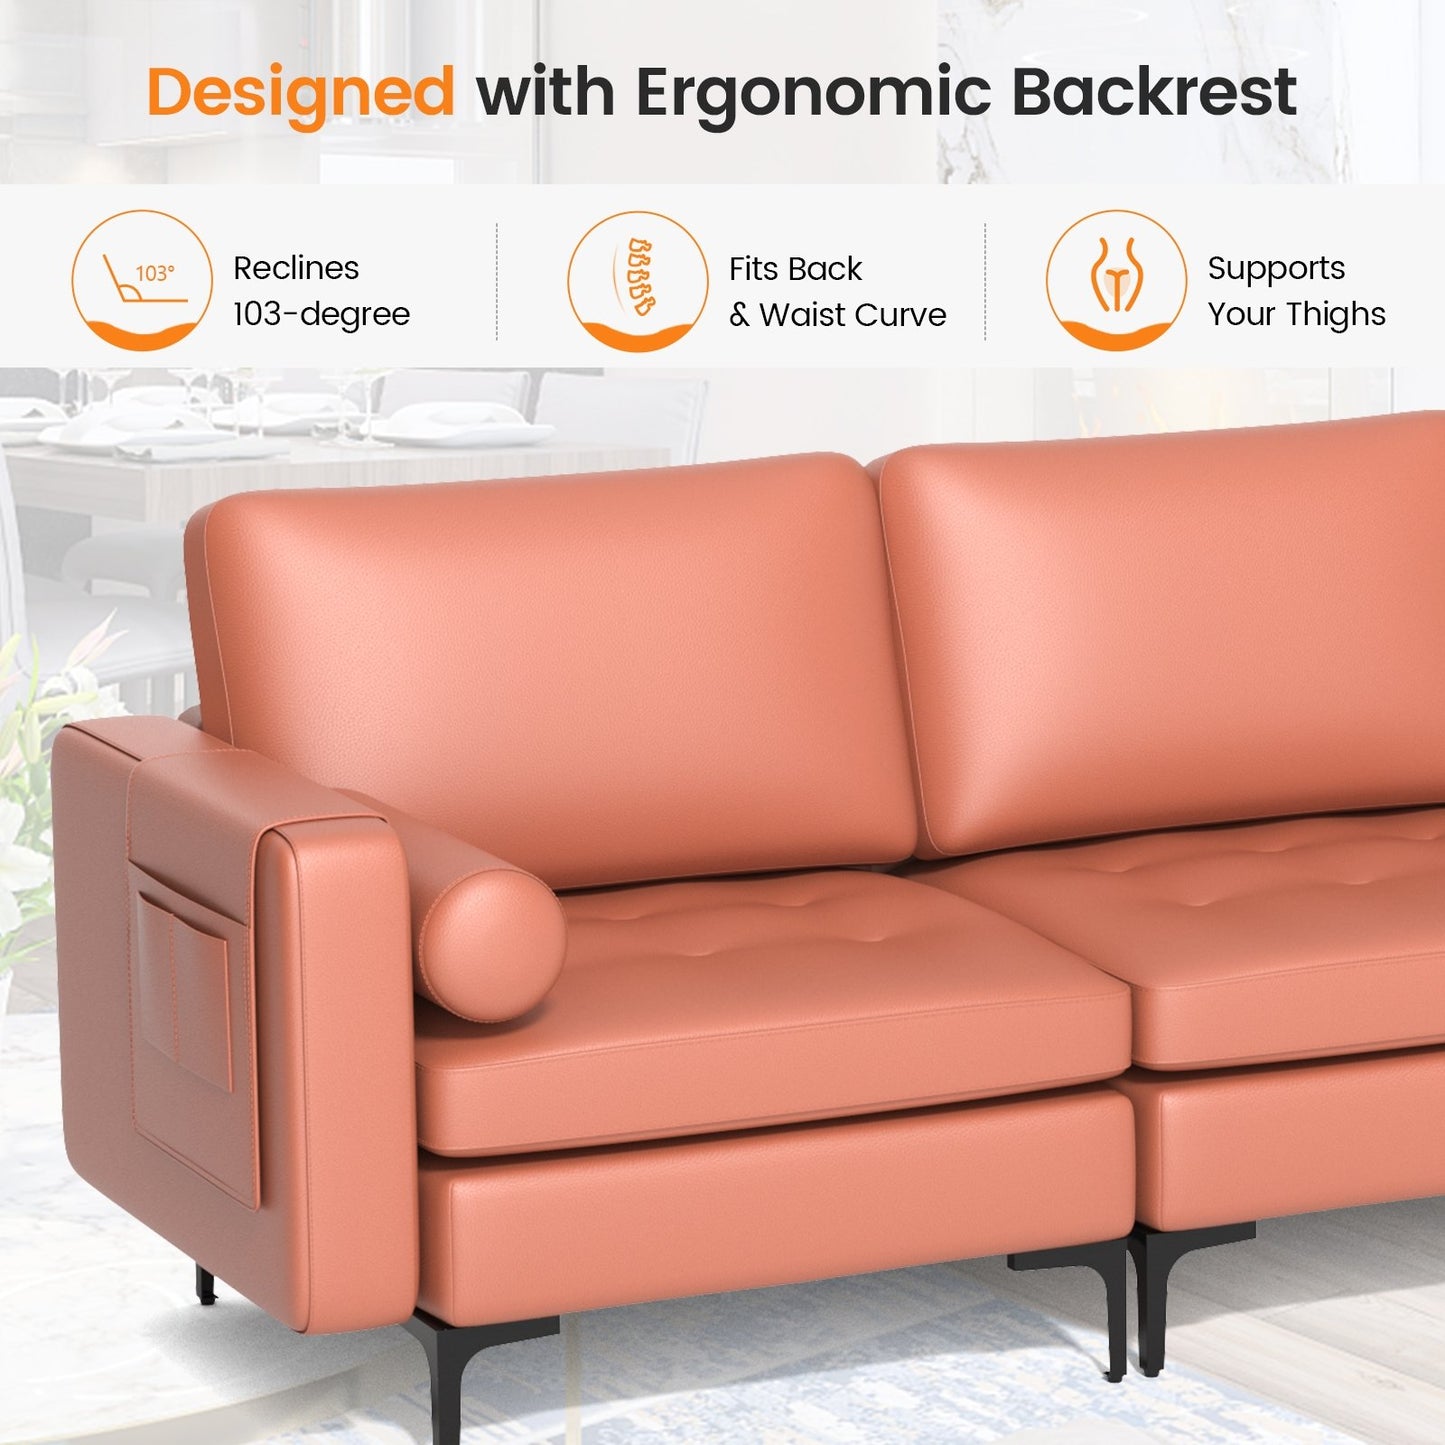 Modular 3-Seat Sofa Couch with Socket USB Ports and Side Storage Pocket, Pink